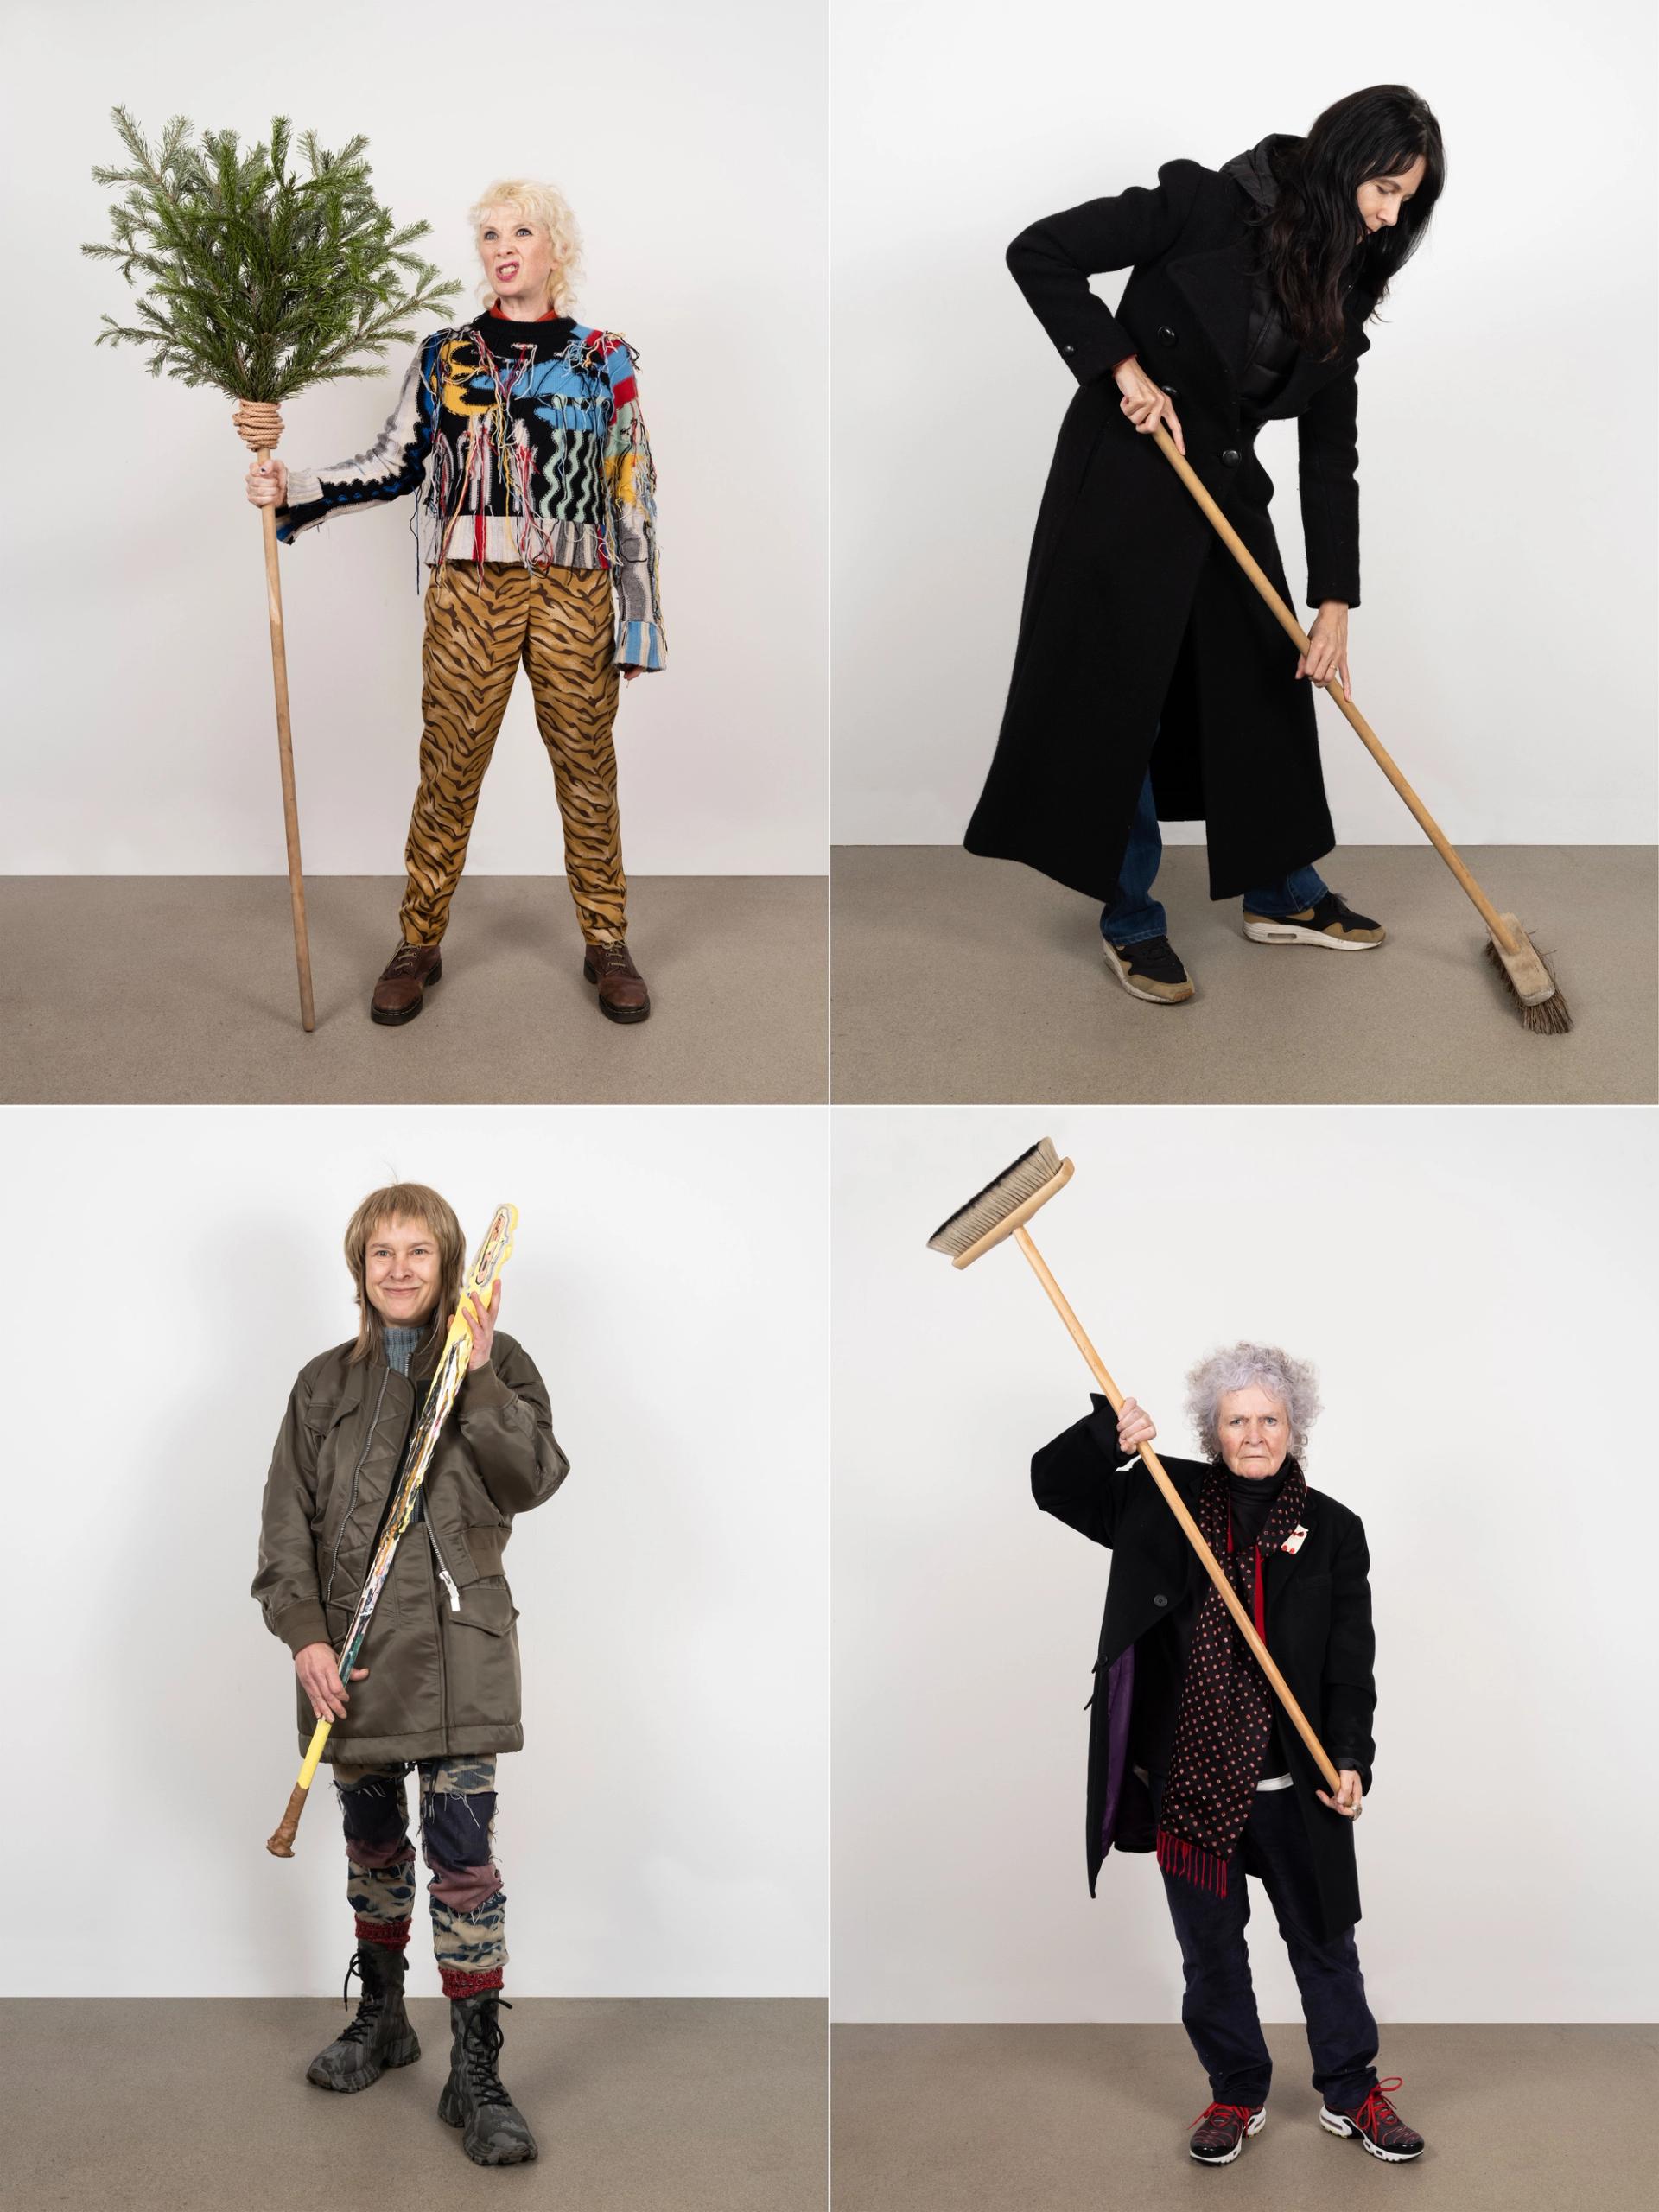 Gillian Wearing, Maggi Hambling, Sarah Lucas and Georgina Starr, some of the female British artists in the exhibition BIG WOMEN, brandishing homemade broomsticks Photo: Katie Morrison; courtesy of the artist and Sadie Coles HQ